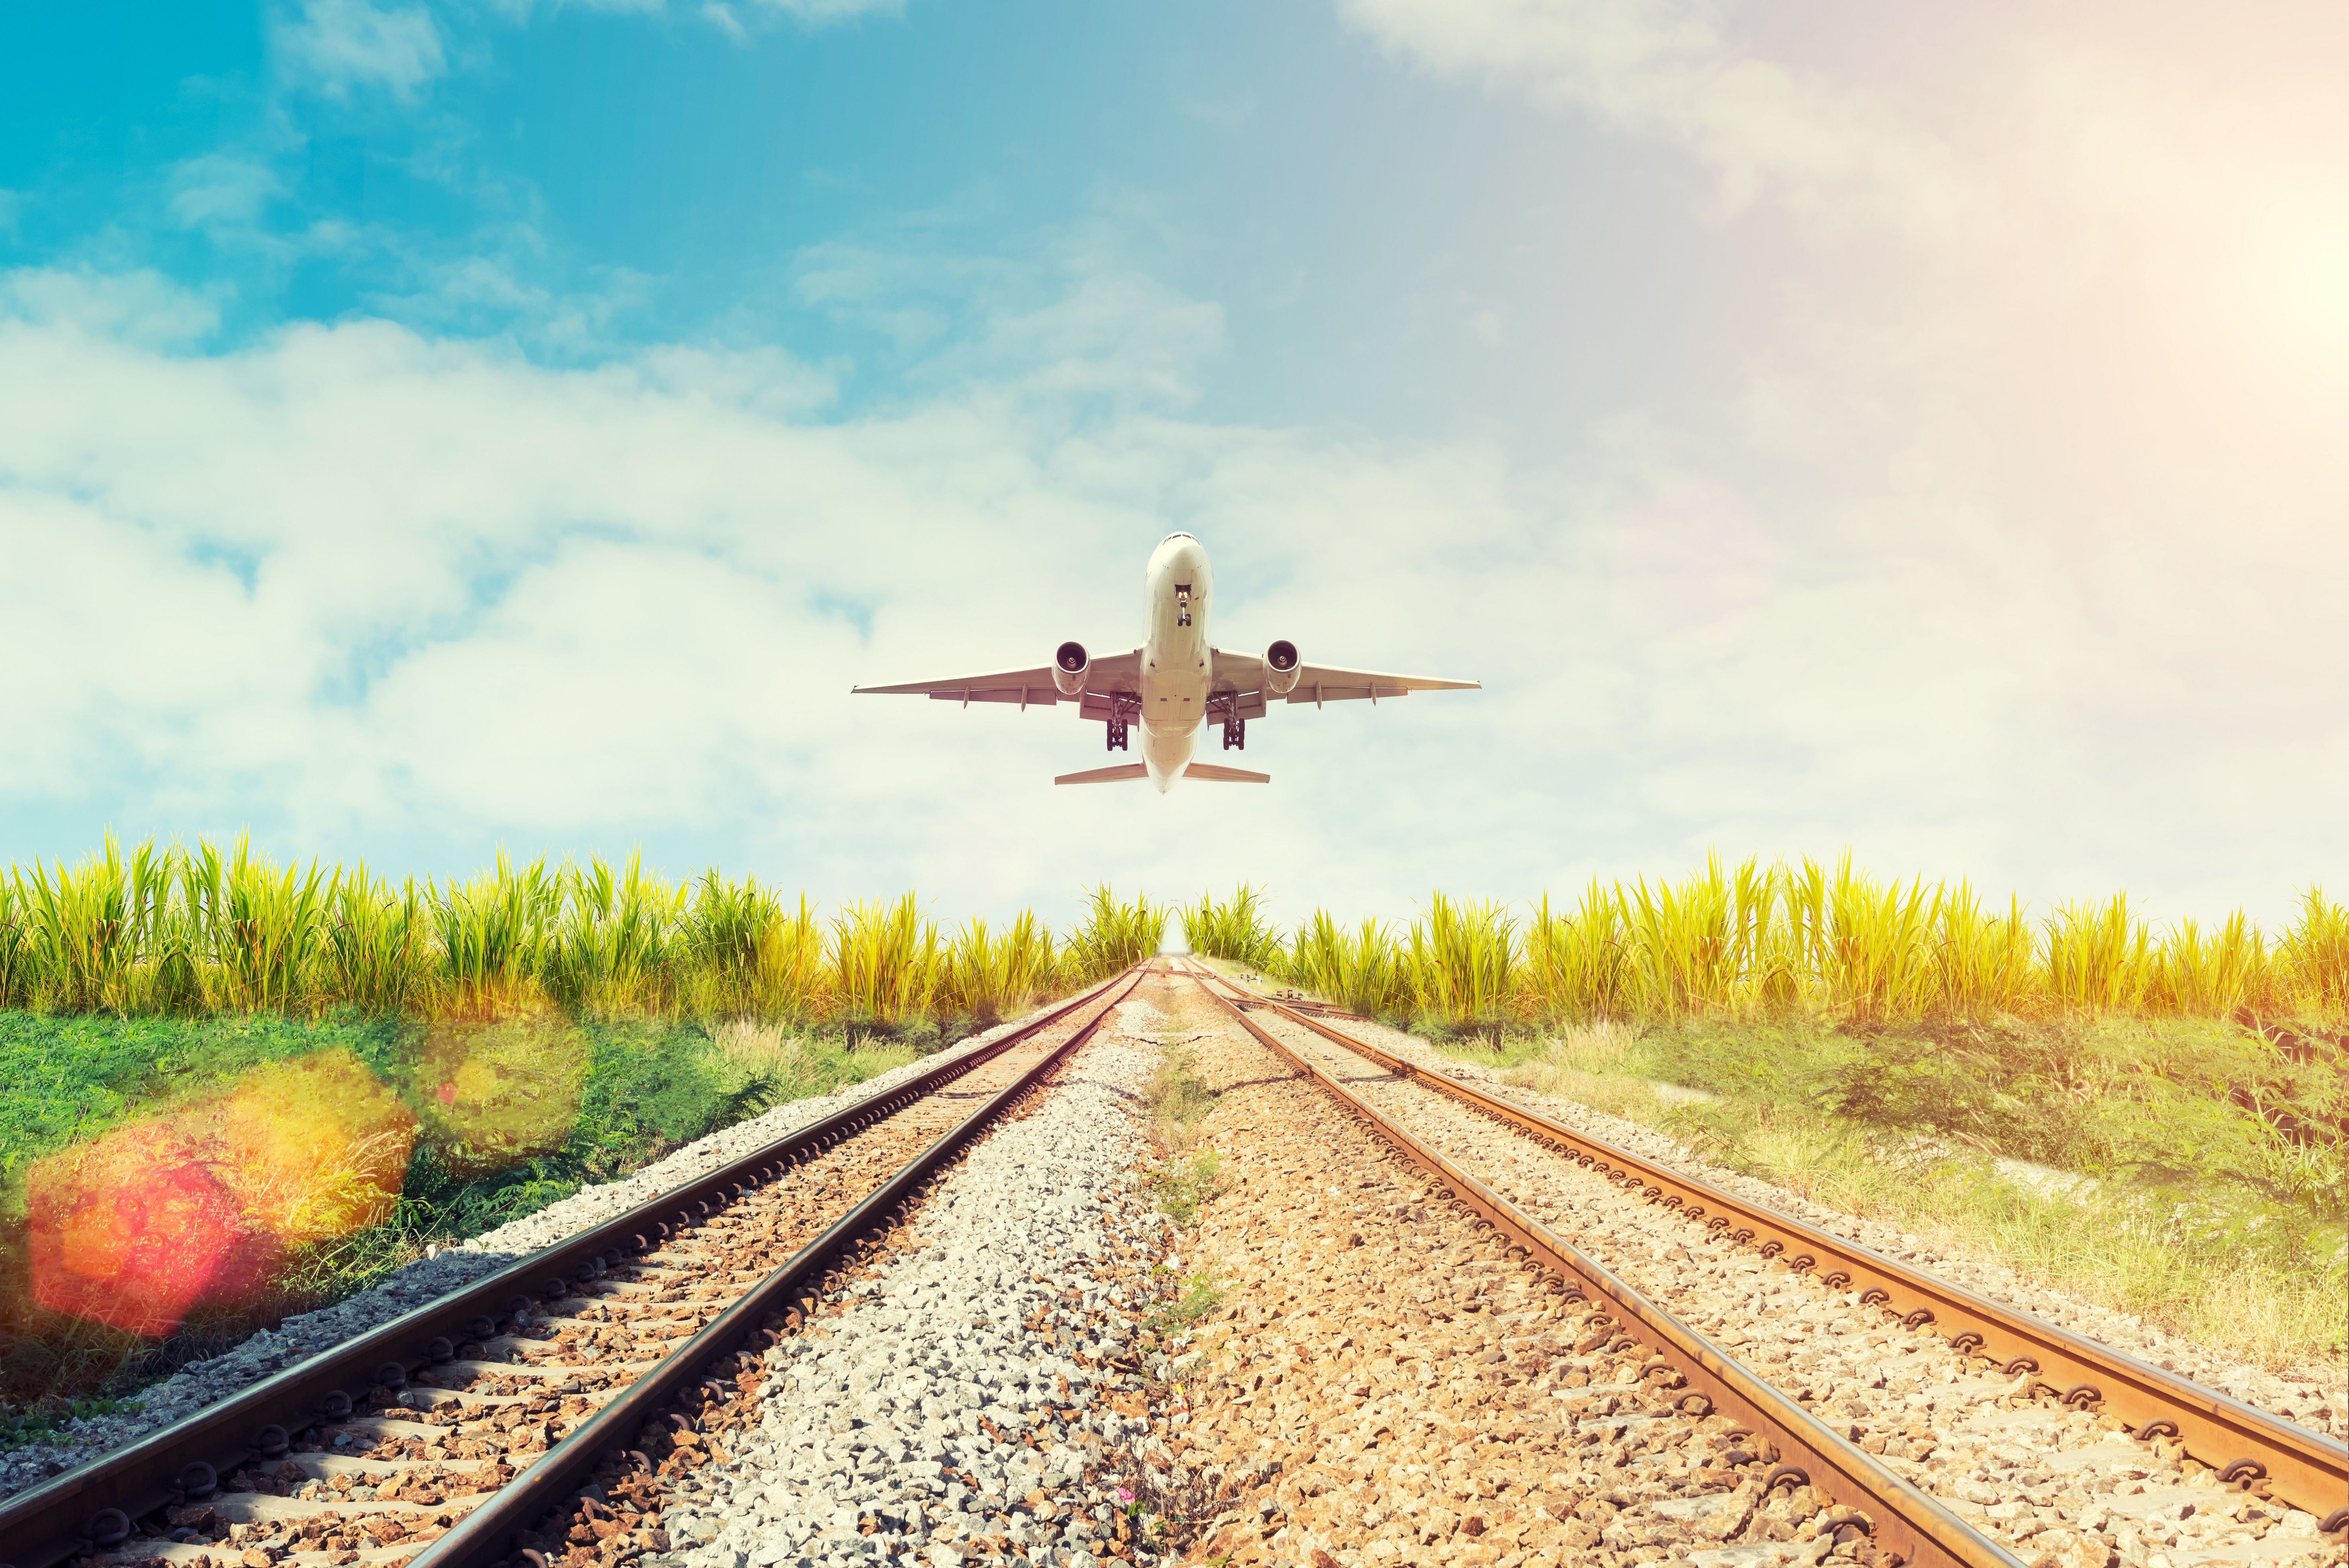 Airplane Taking Off Over Railway